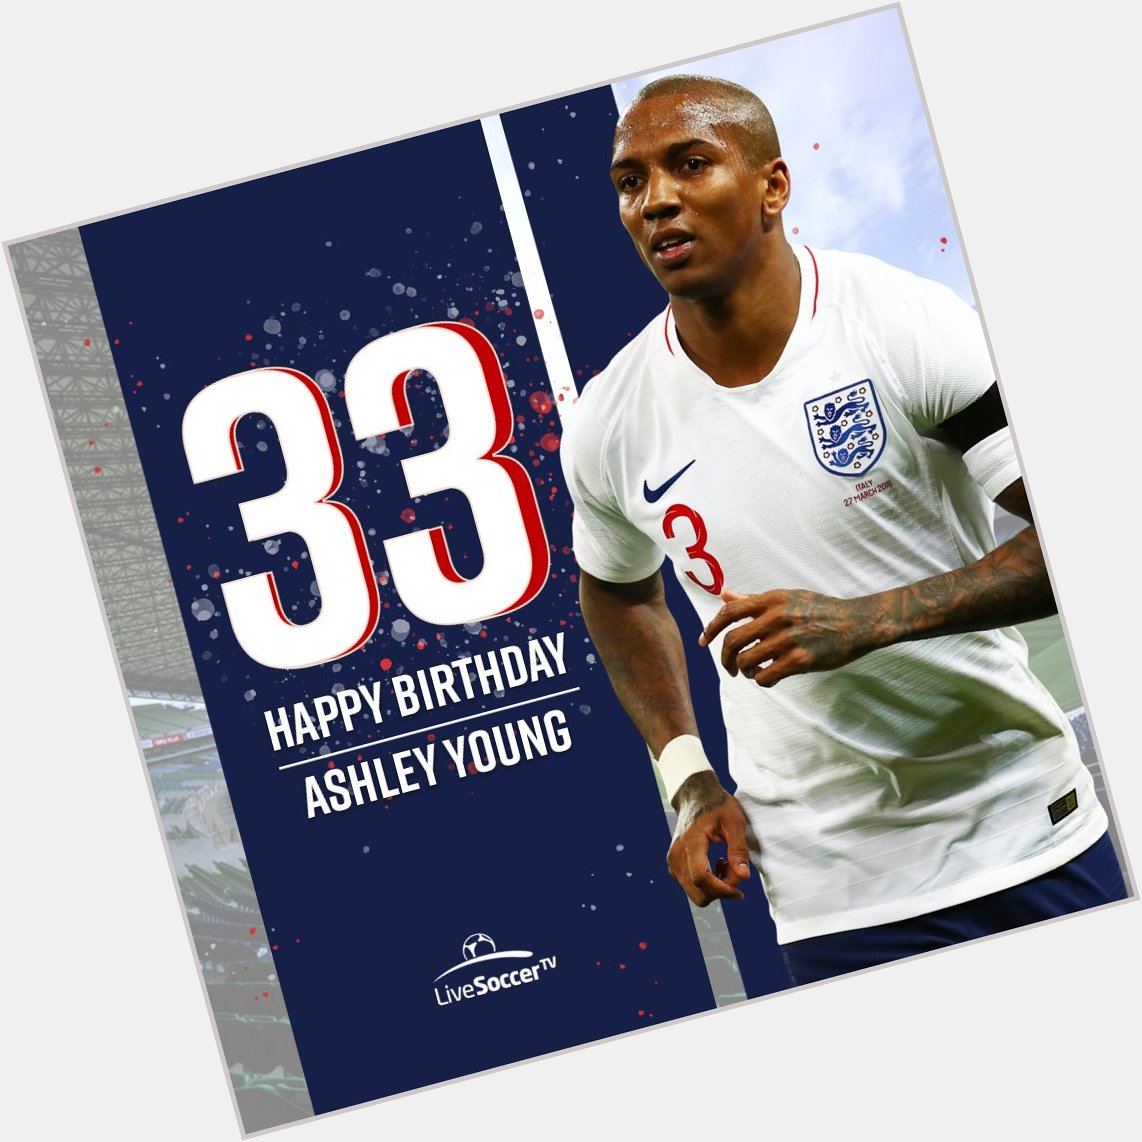 Happy birthday, Ashley Young  Will he bring it home?   